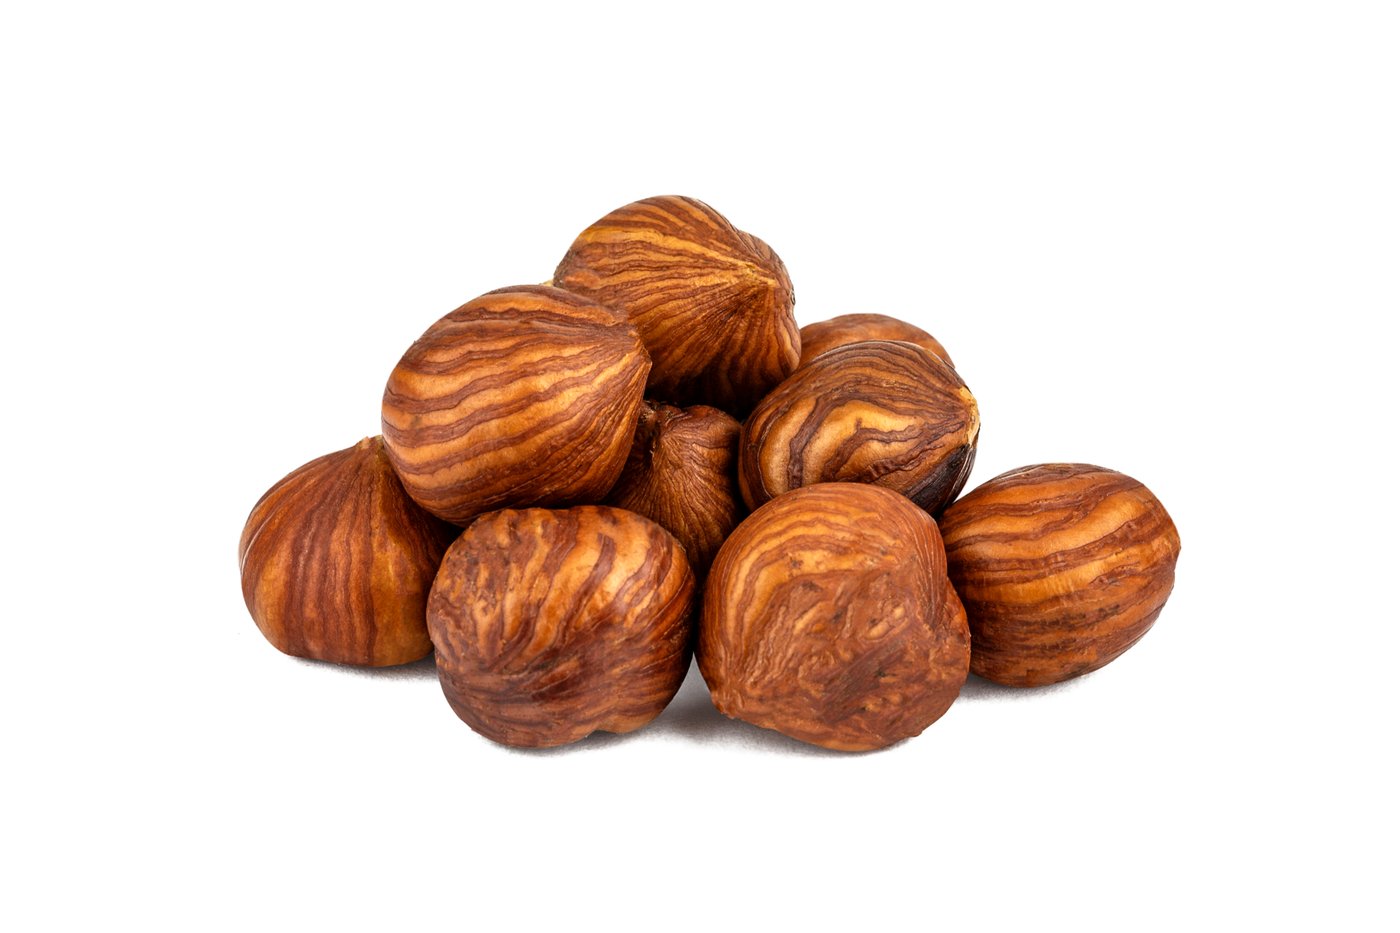 Roasted Hazelnuts / Filberts (Unsalted) image zoom